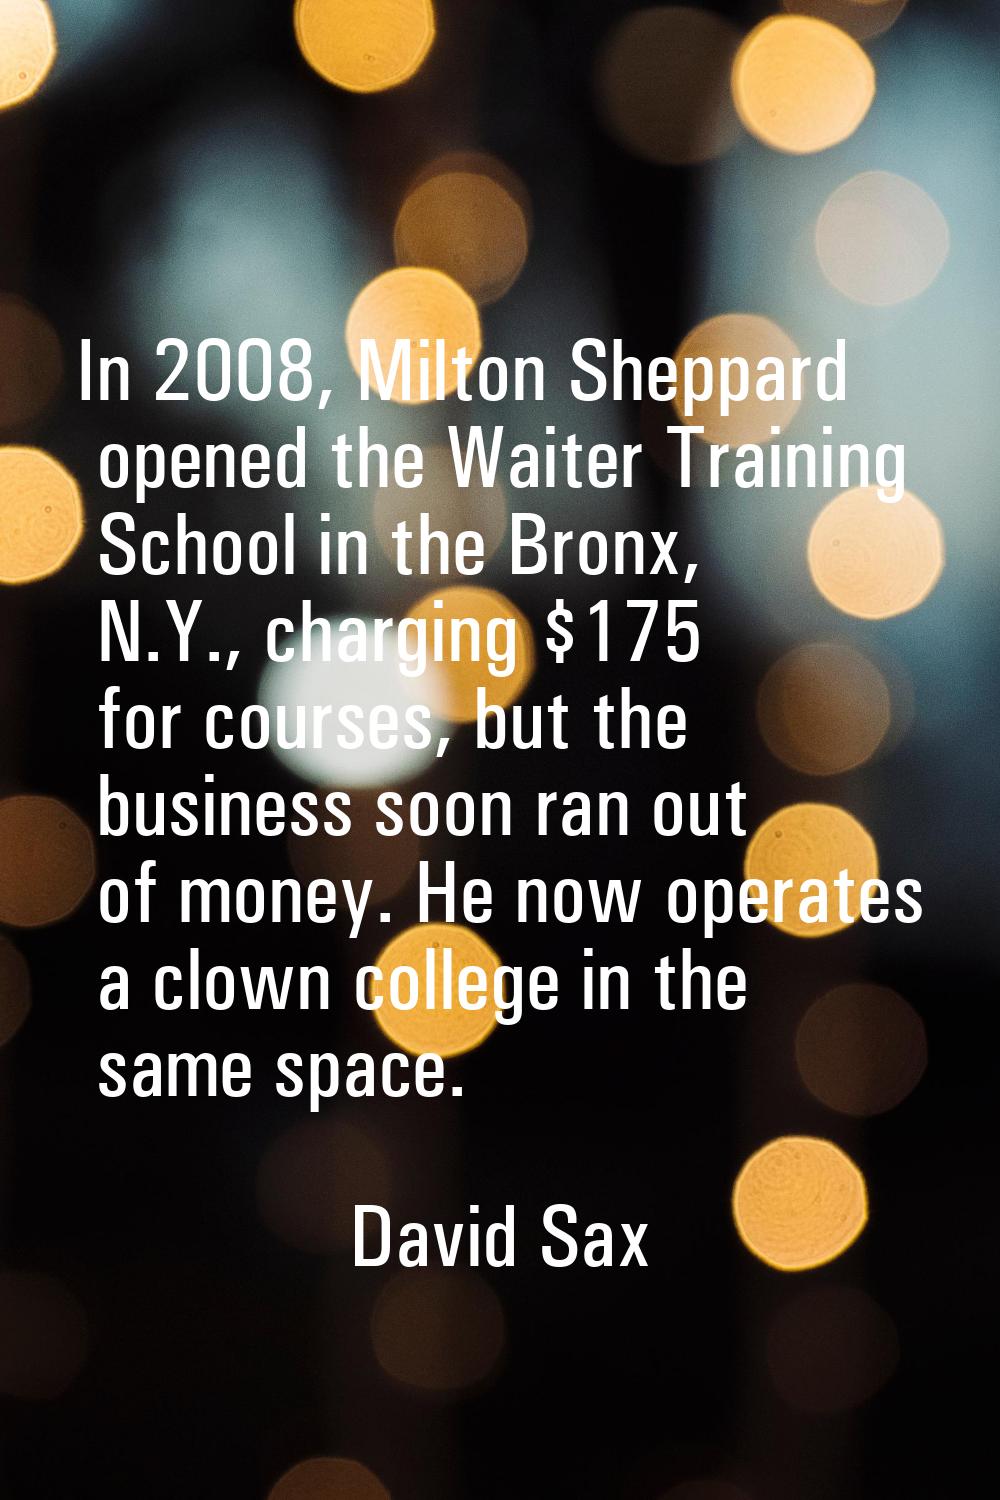 In 2008, Milton Sheppard opened the Waiter Training School in the Bronx, N.Y., charging $175 for co